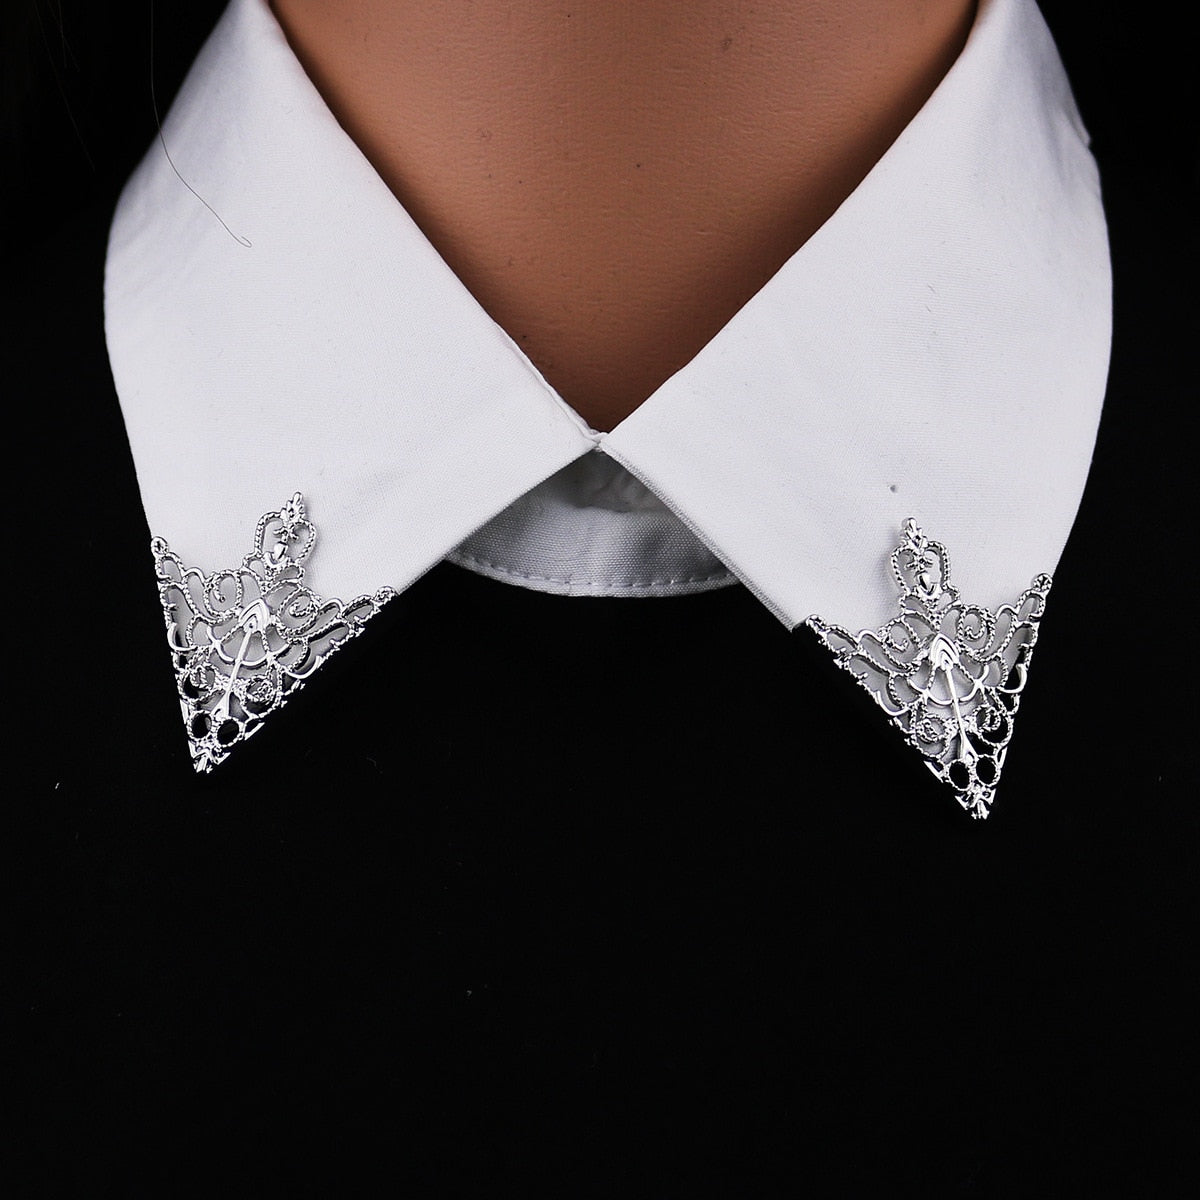 Vintage Fashion Triangle Shirt Collar Tips for Men and Women - Go Steampunk